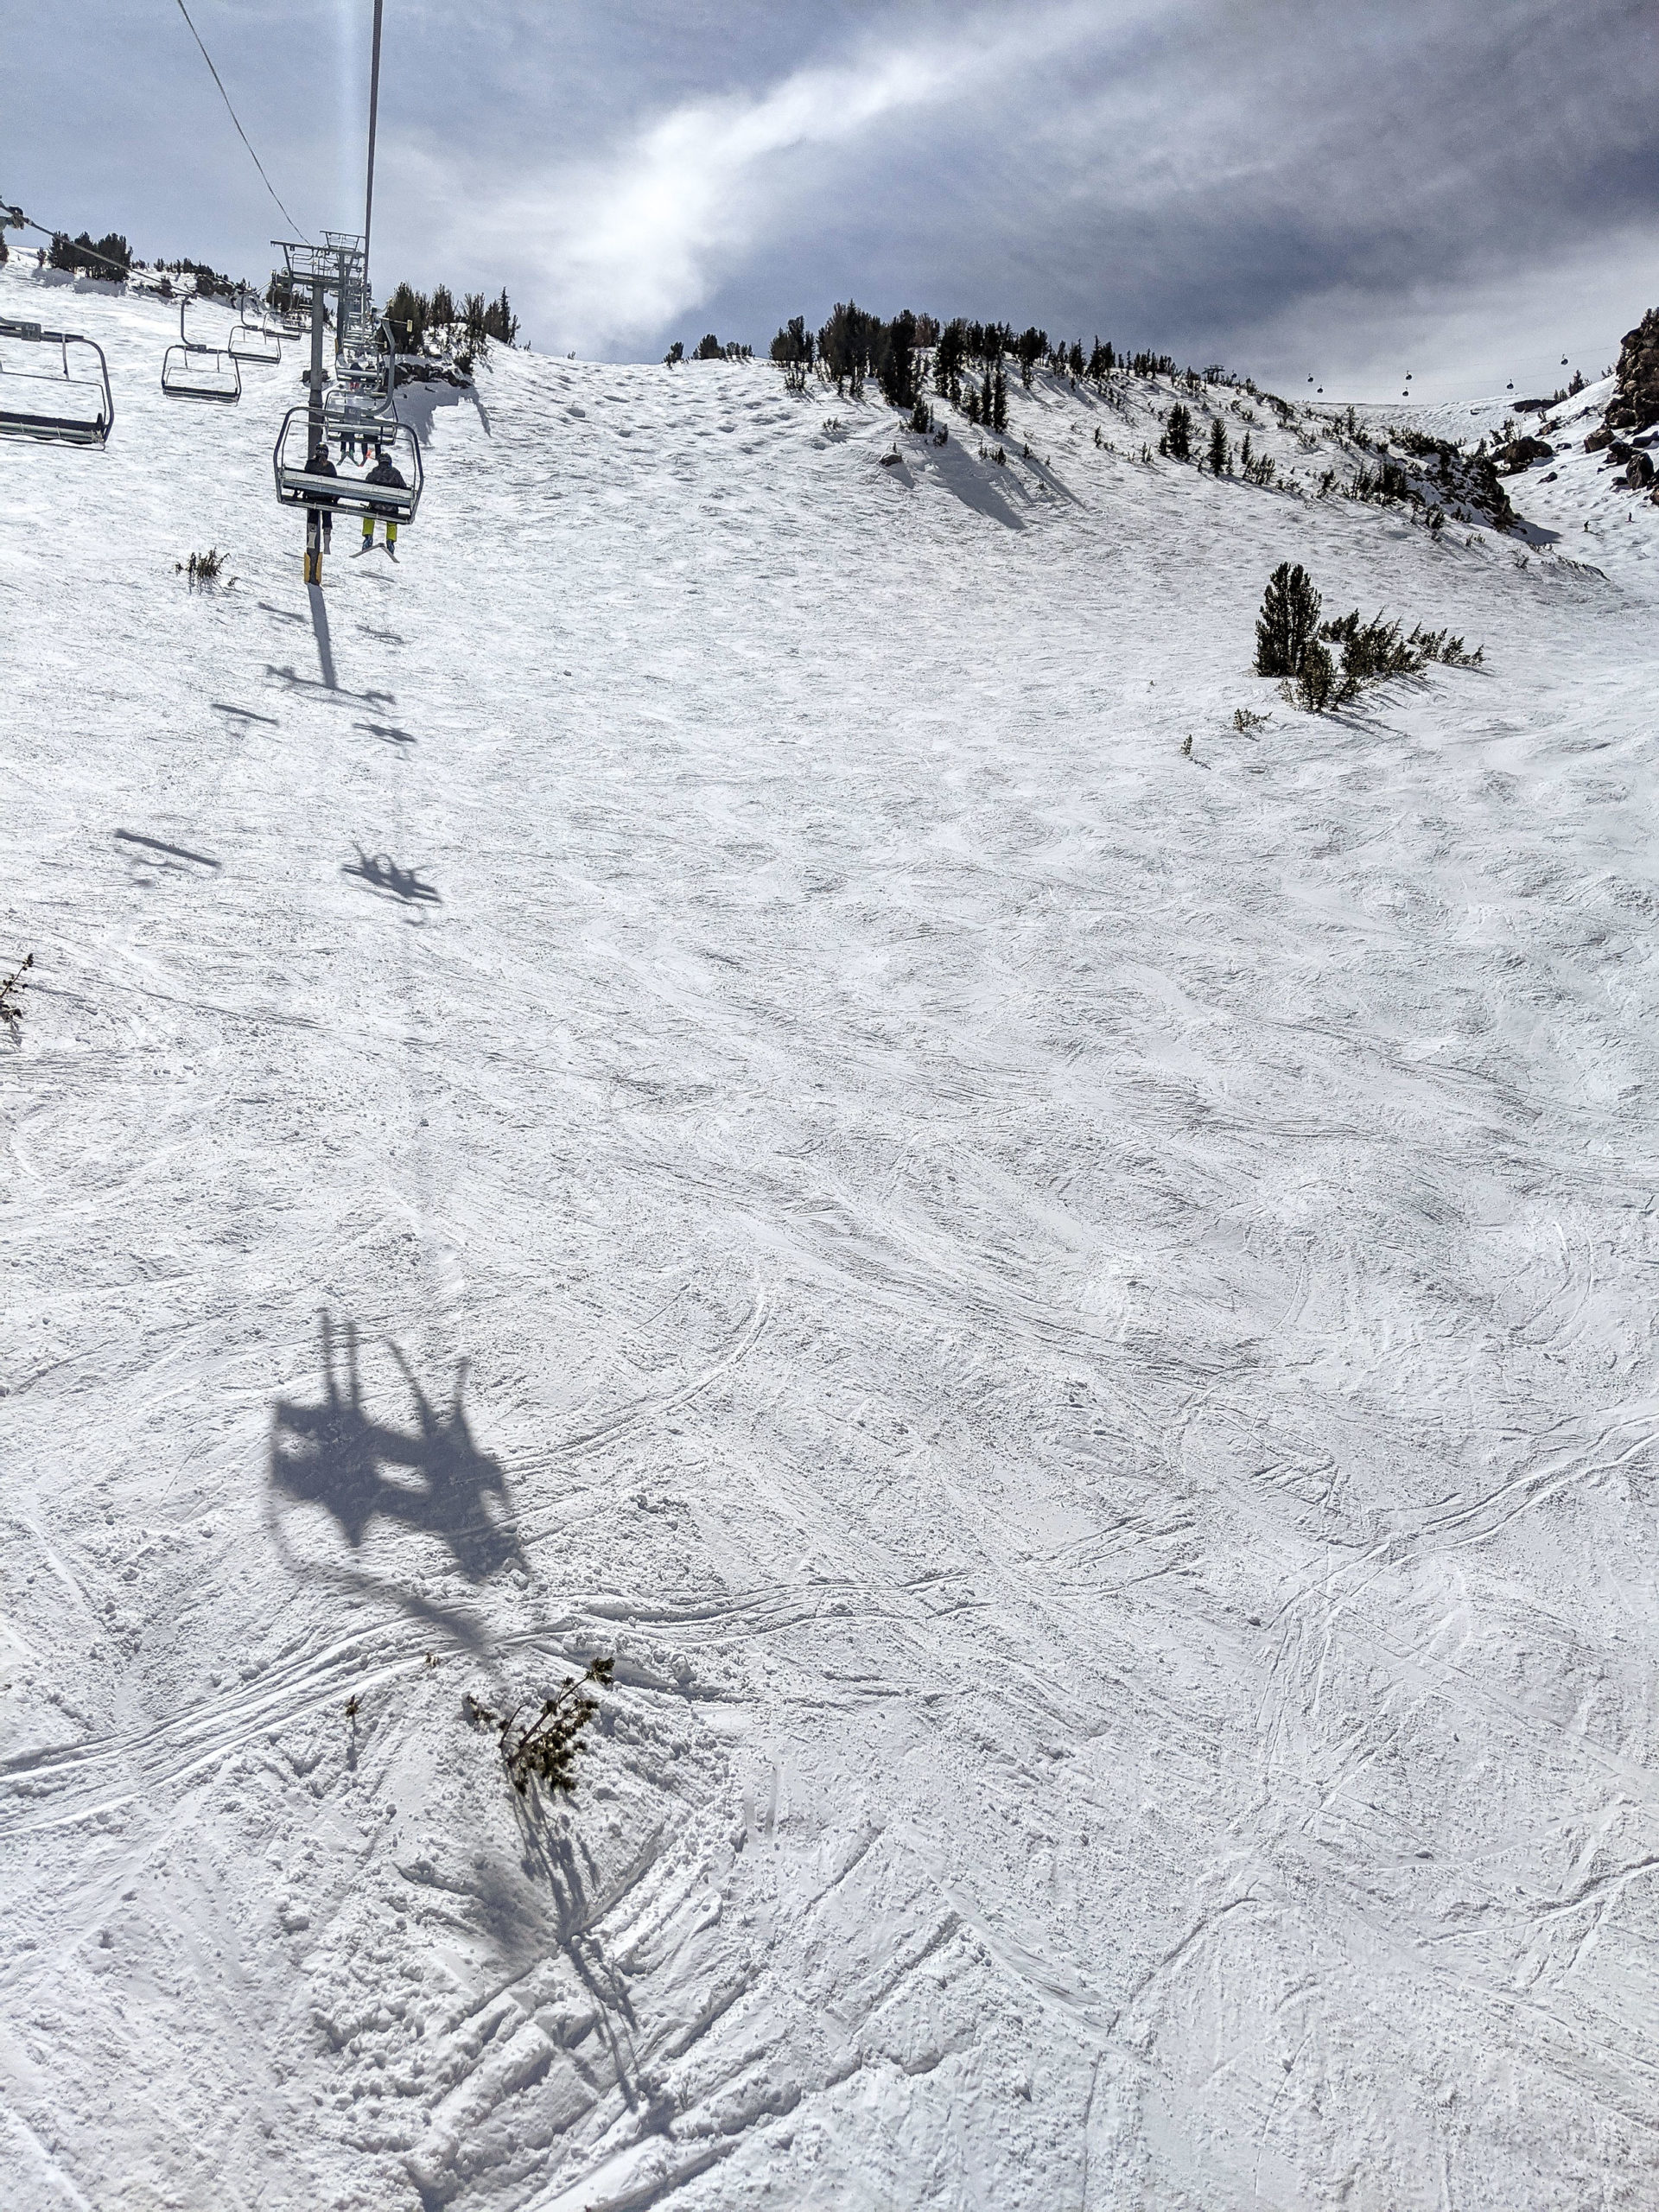 Read more about the article Mammoth Mountain Snow Report from the Snowman